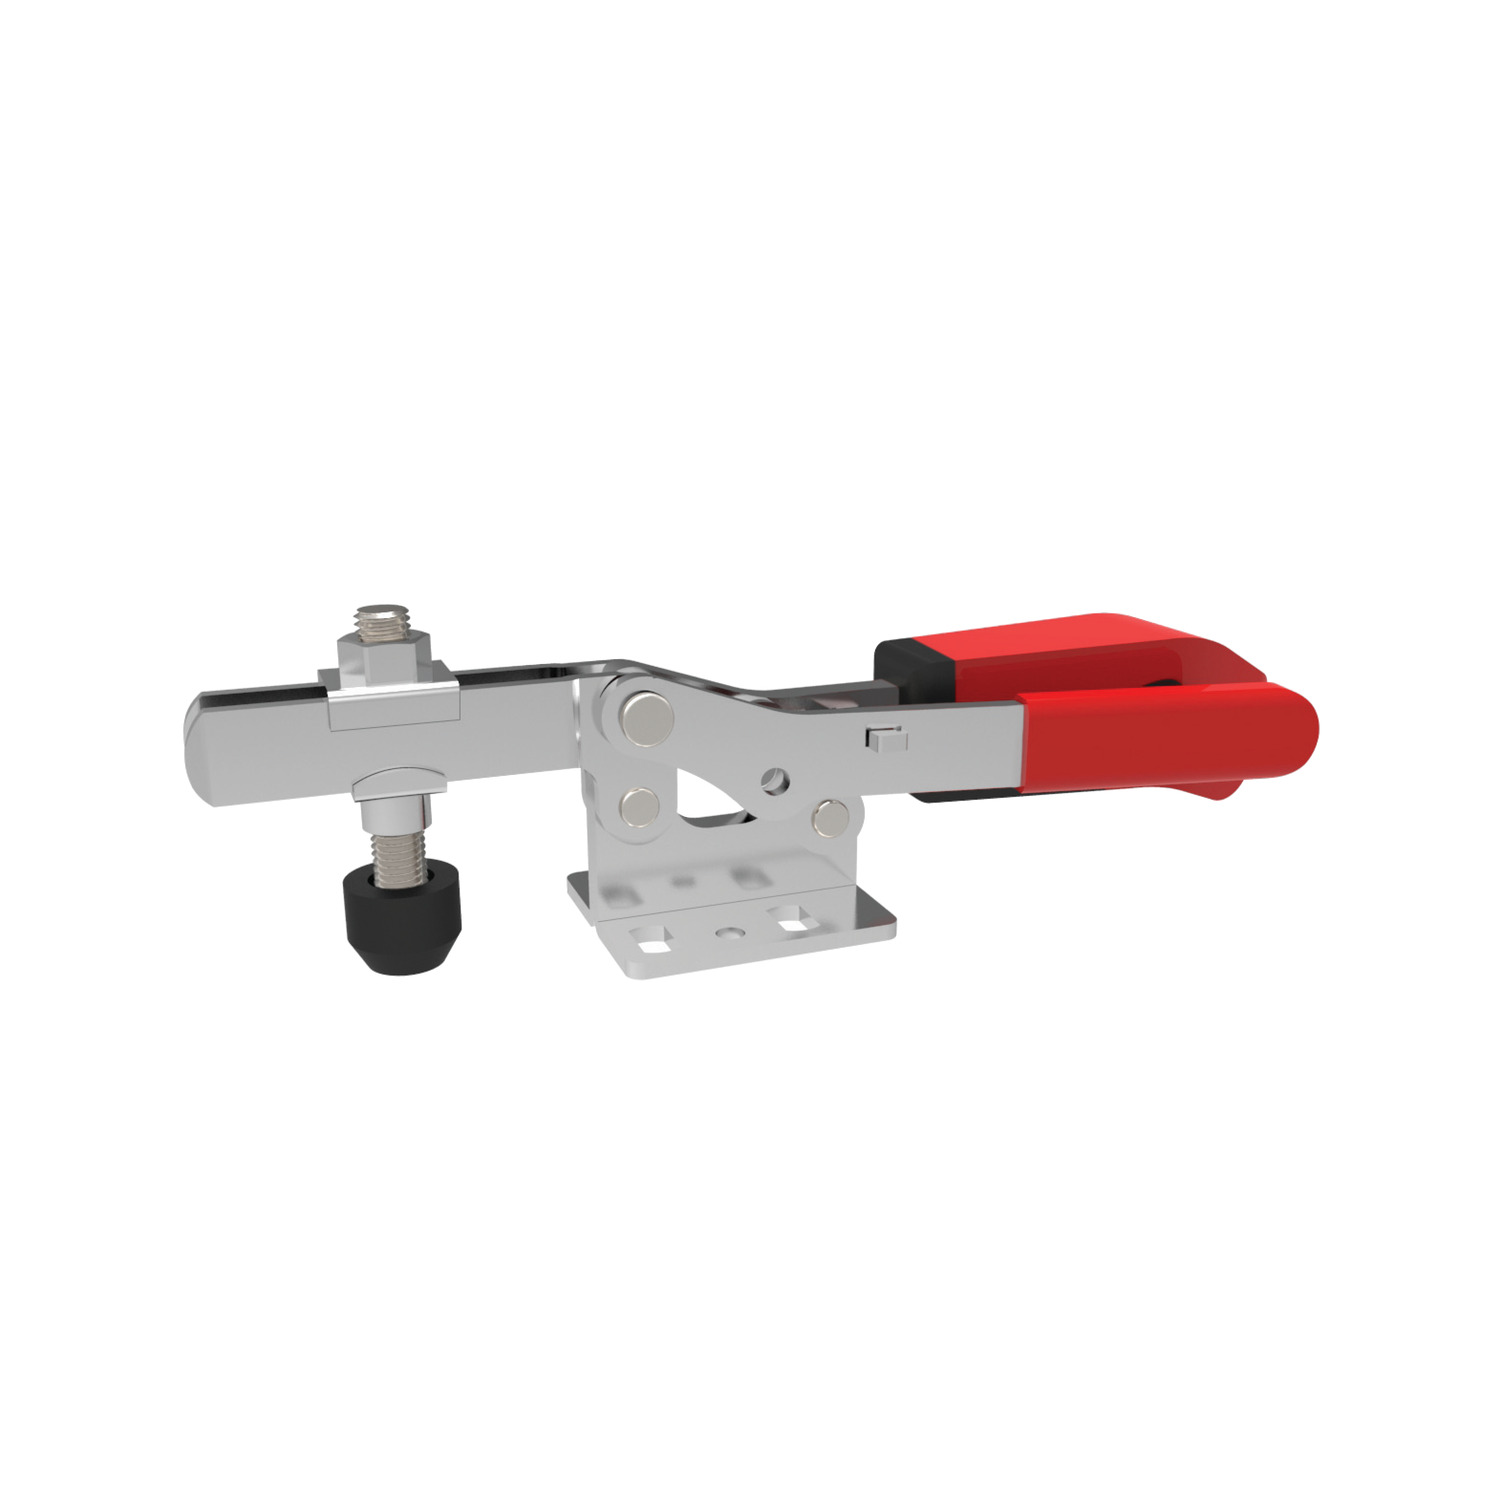 41010 - Horizontal Acting Toggle Clamps